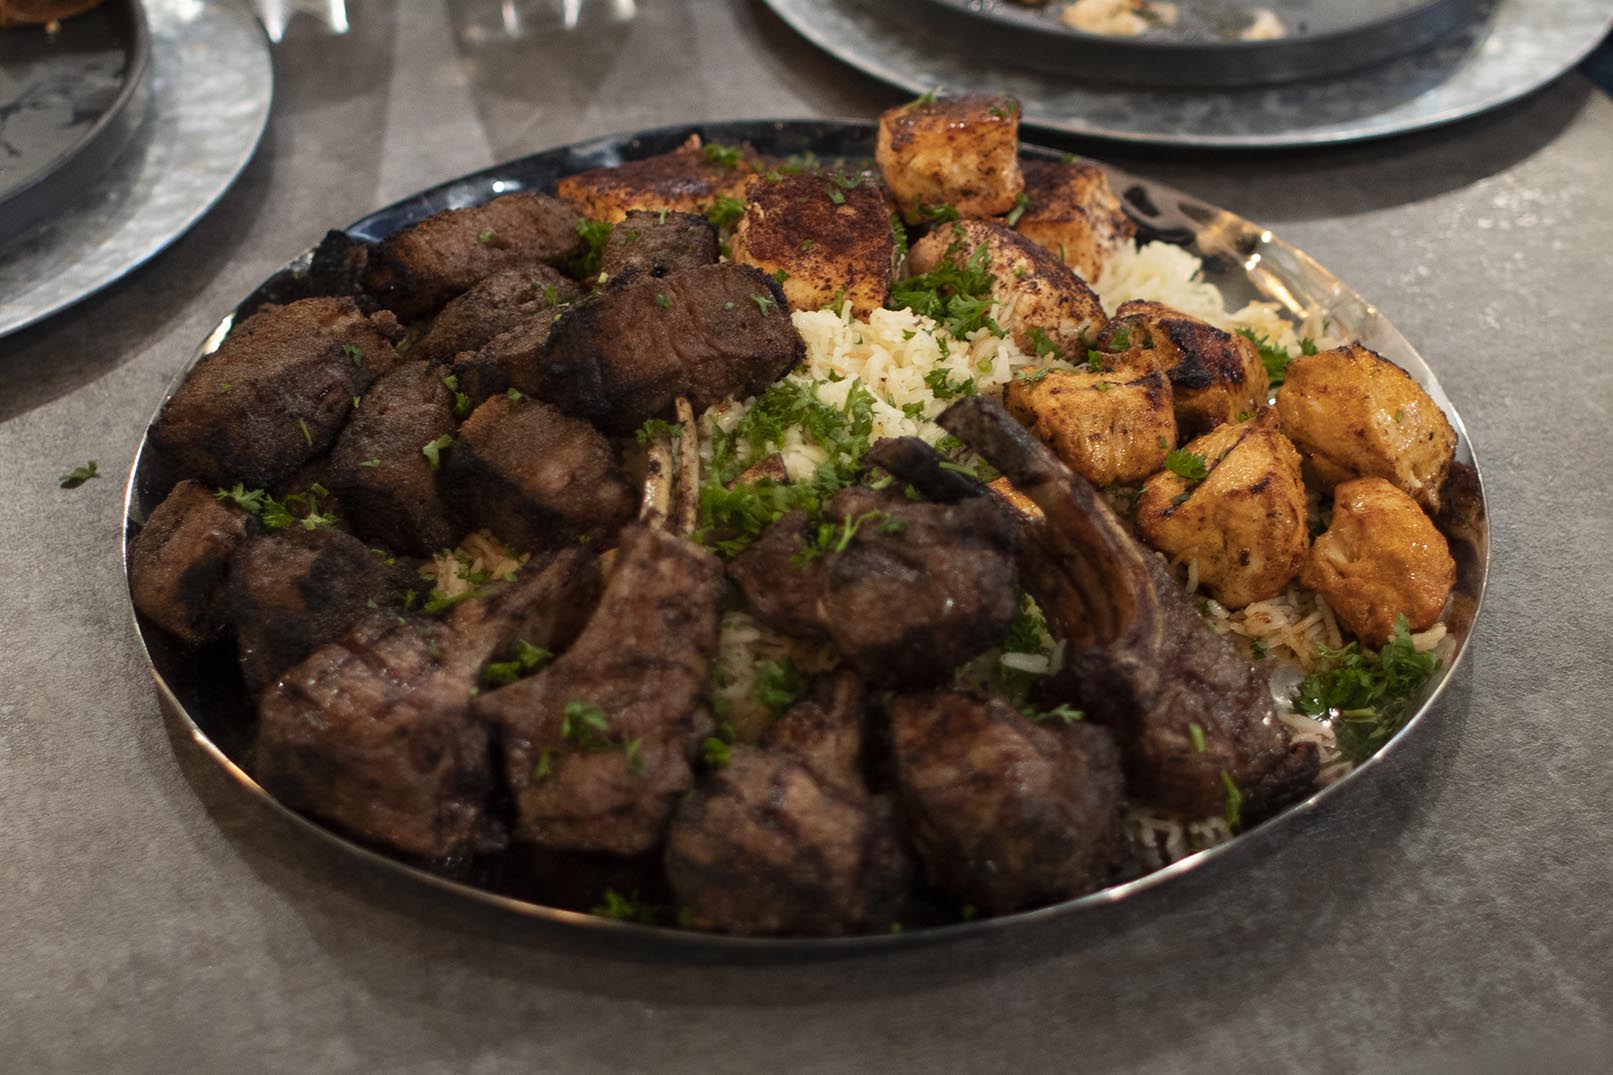 In the Hummus Labs restaurant the main course is placed out on a large round platter for the evening’s Chef’s Table. The platter is topped with A5 Wagu Beef Kabob, Grilled New Zealand Lamb Chops, Mediterranean Salmon, and Chicken Kabob served over a bed of rice.